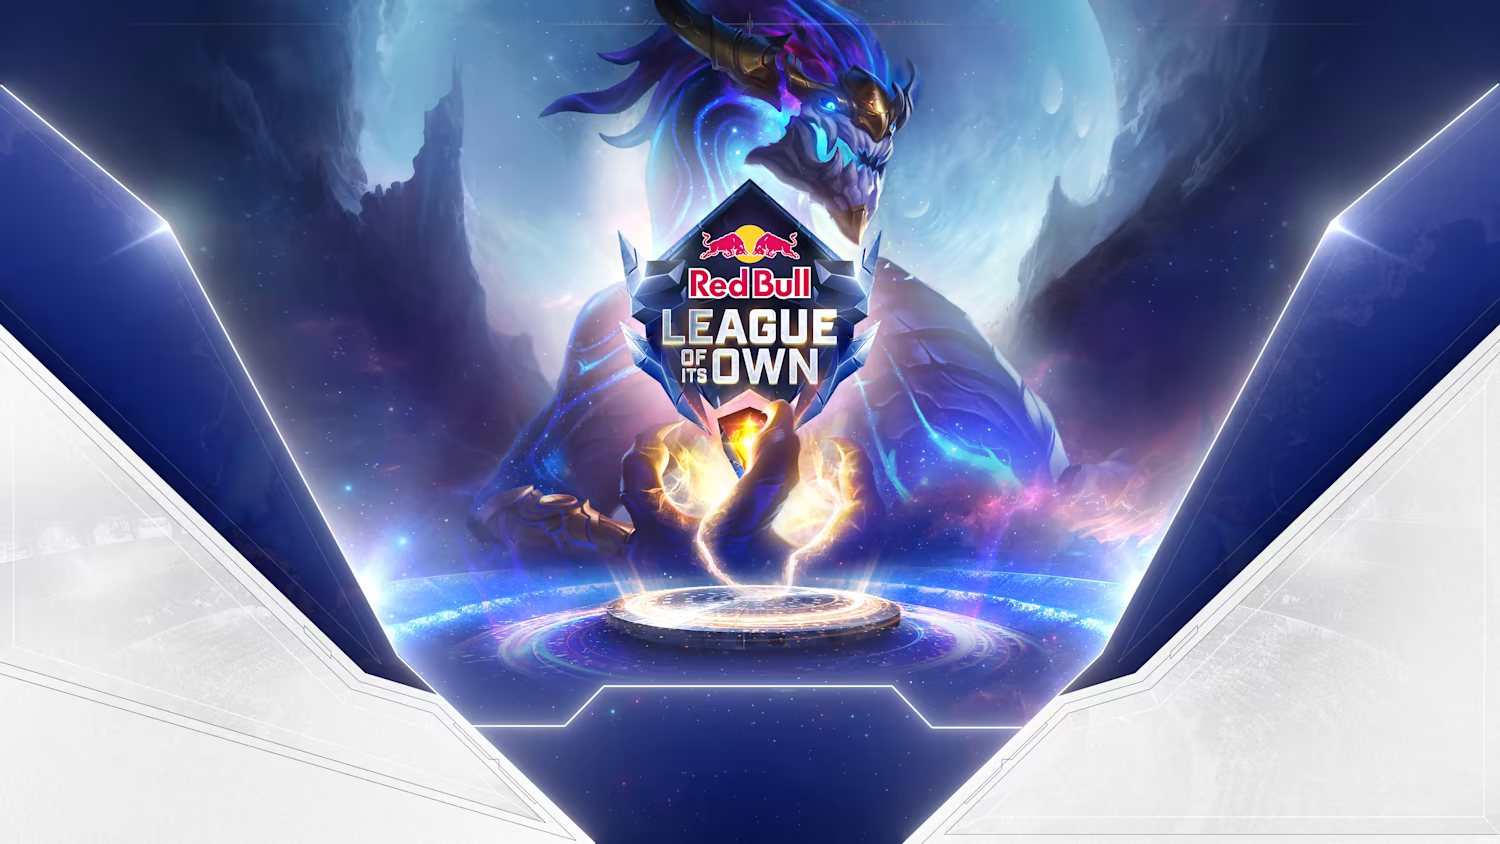 Red Bull League of Its Own sells out in 3 hours